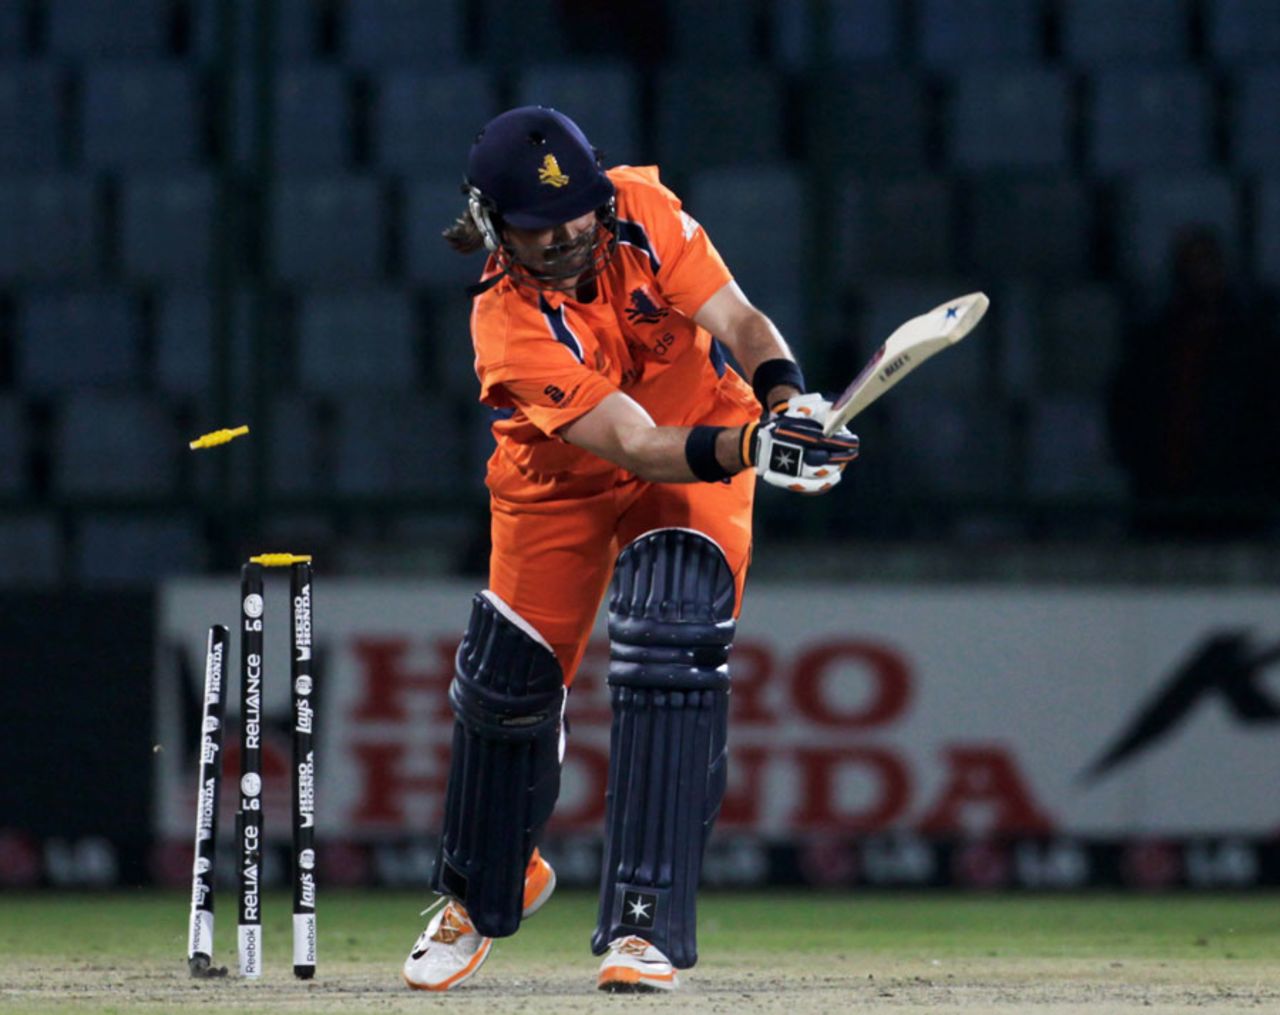 Bas Zuiderent is bowled by Kemar Roach, Netherlands v West Indies, Group B, World Cup 2011, Delhi, February 28, 2011